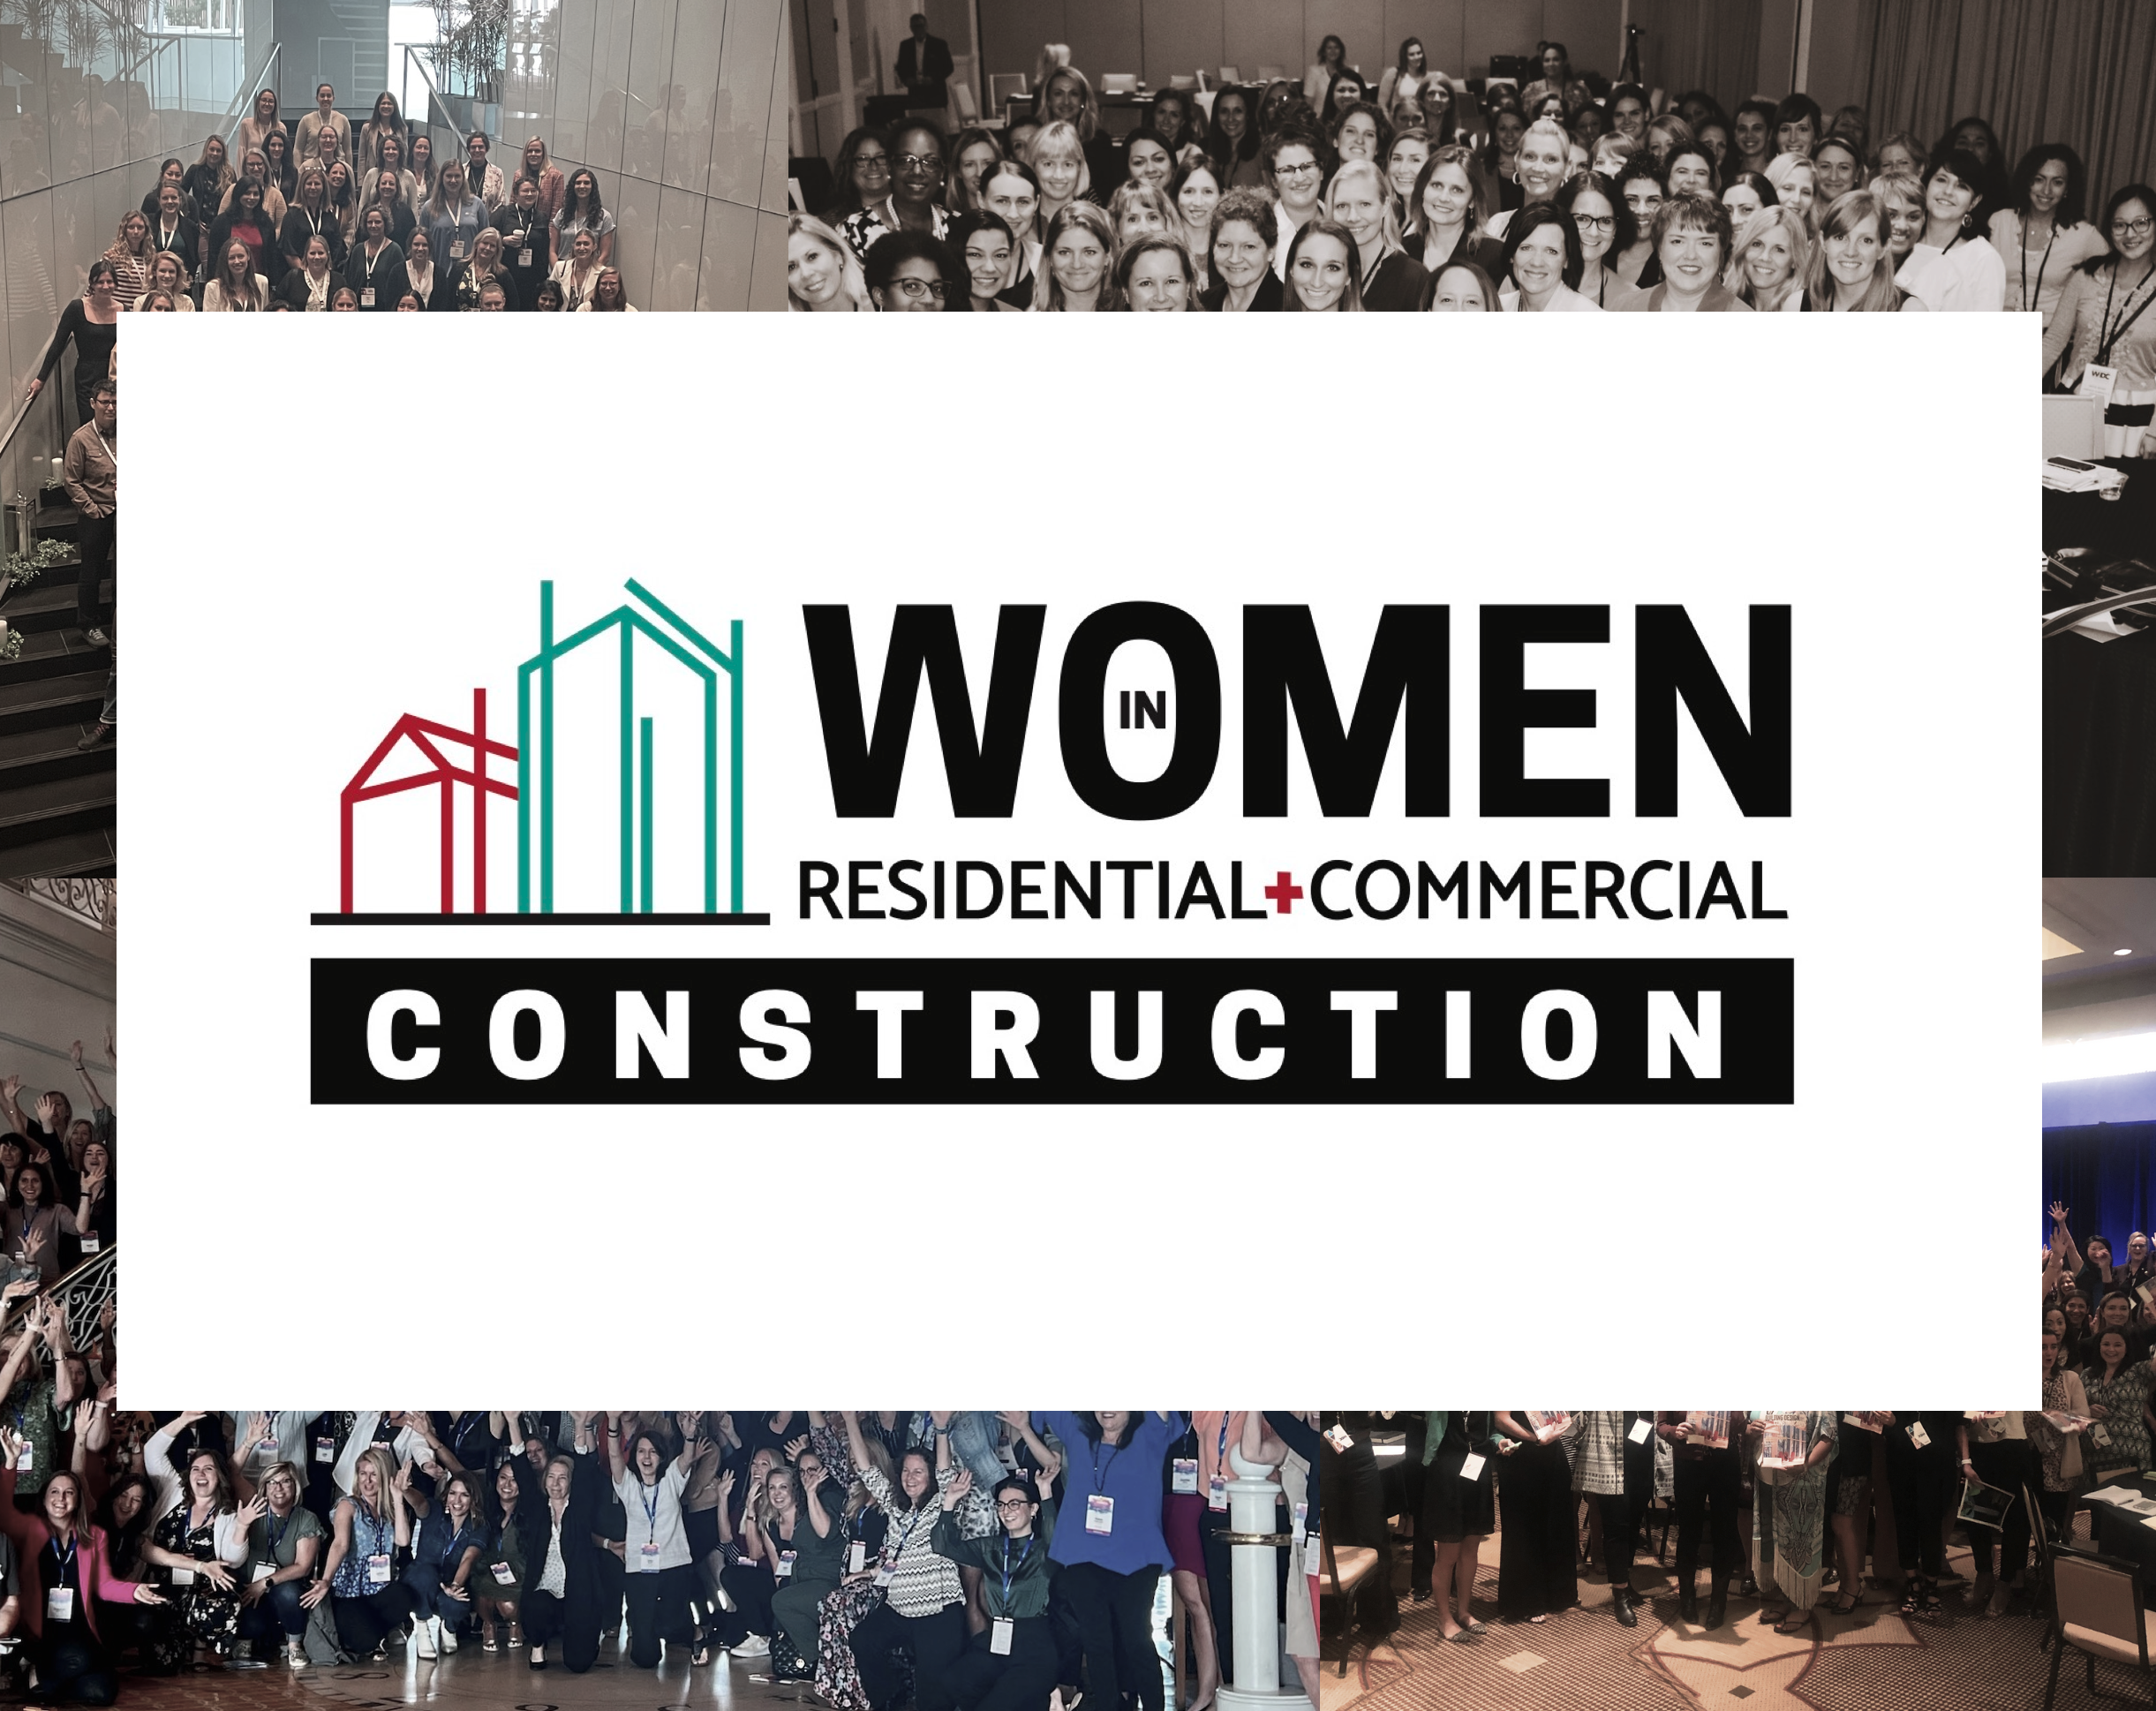 Two leading women in construction events unite to create the Women in Residential + Commercial Construction conference (WIR+CC)